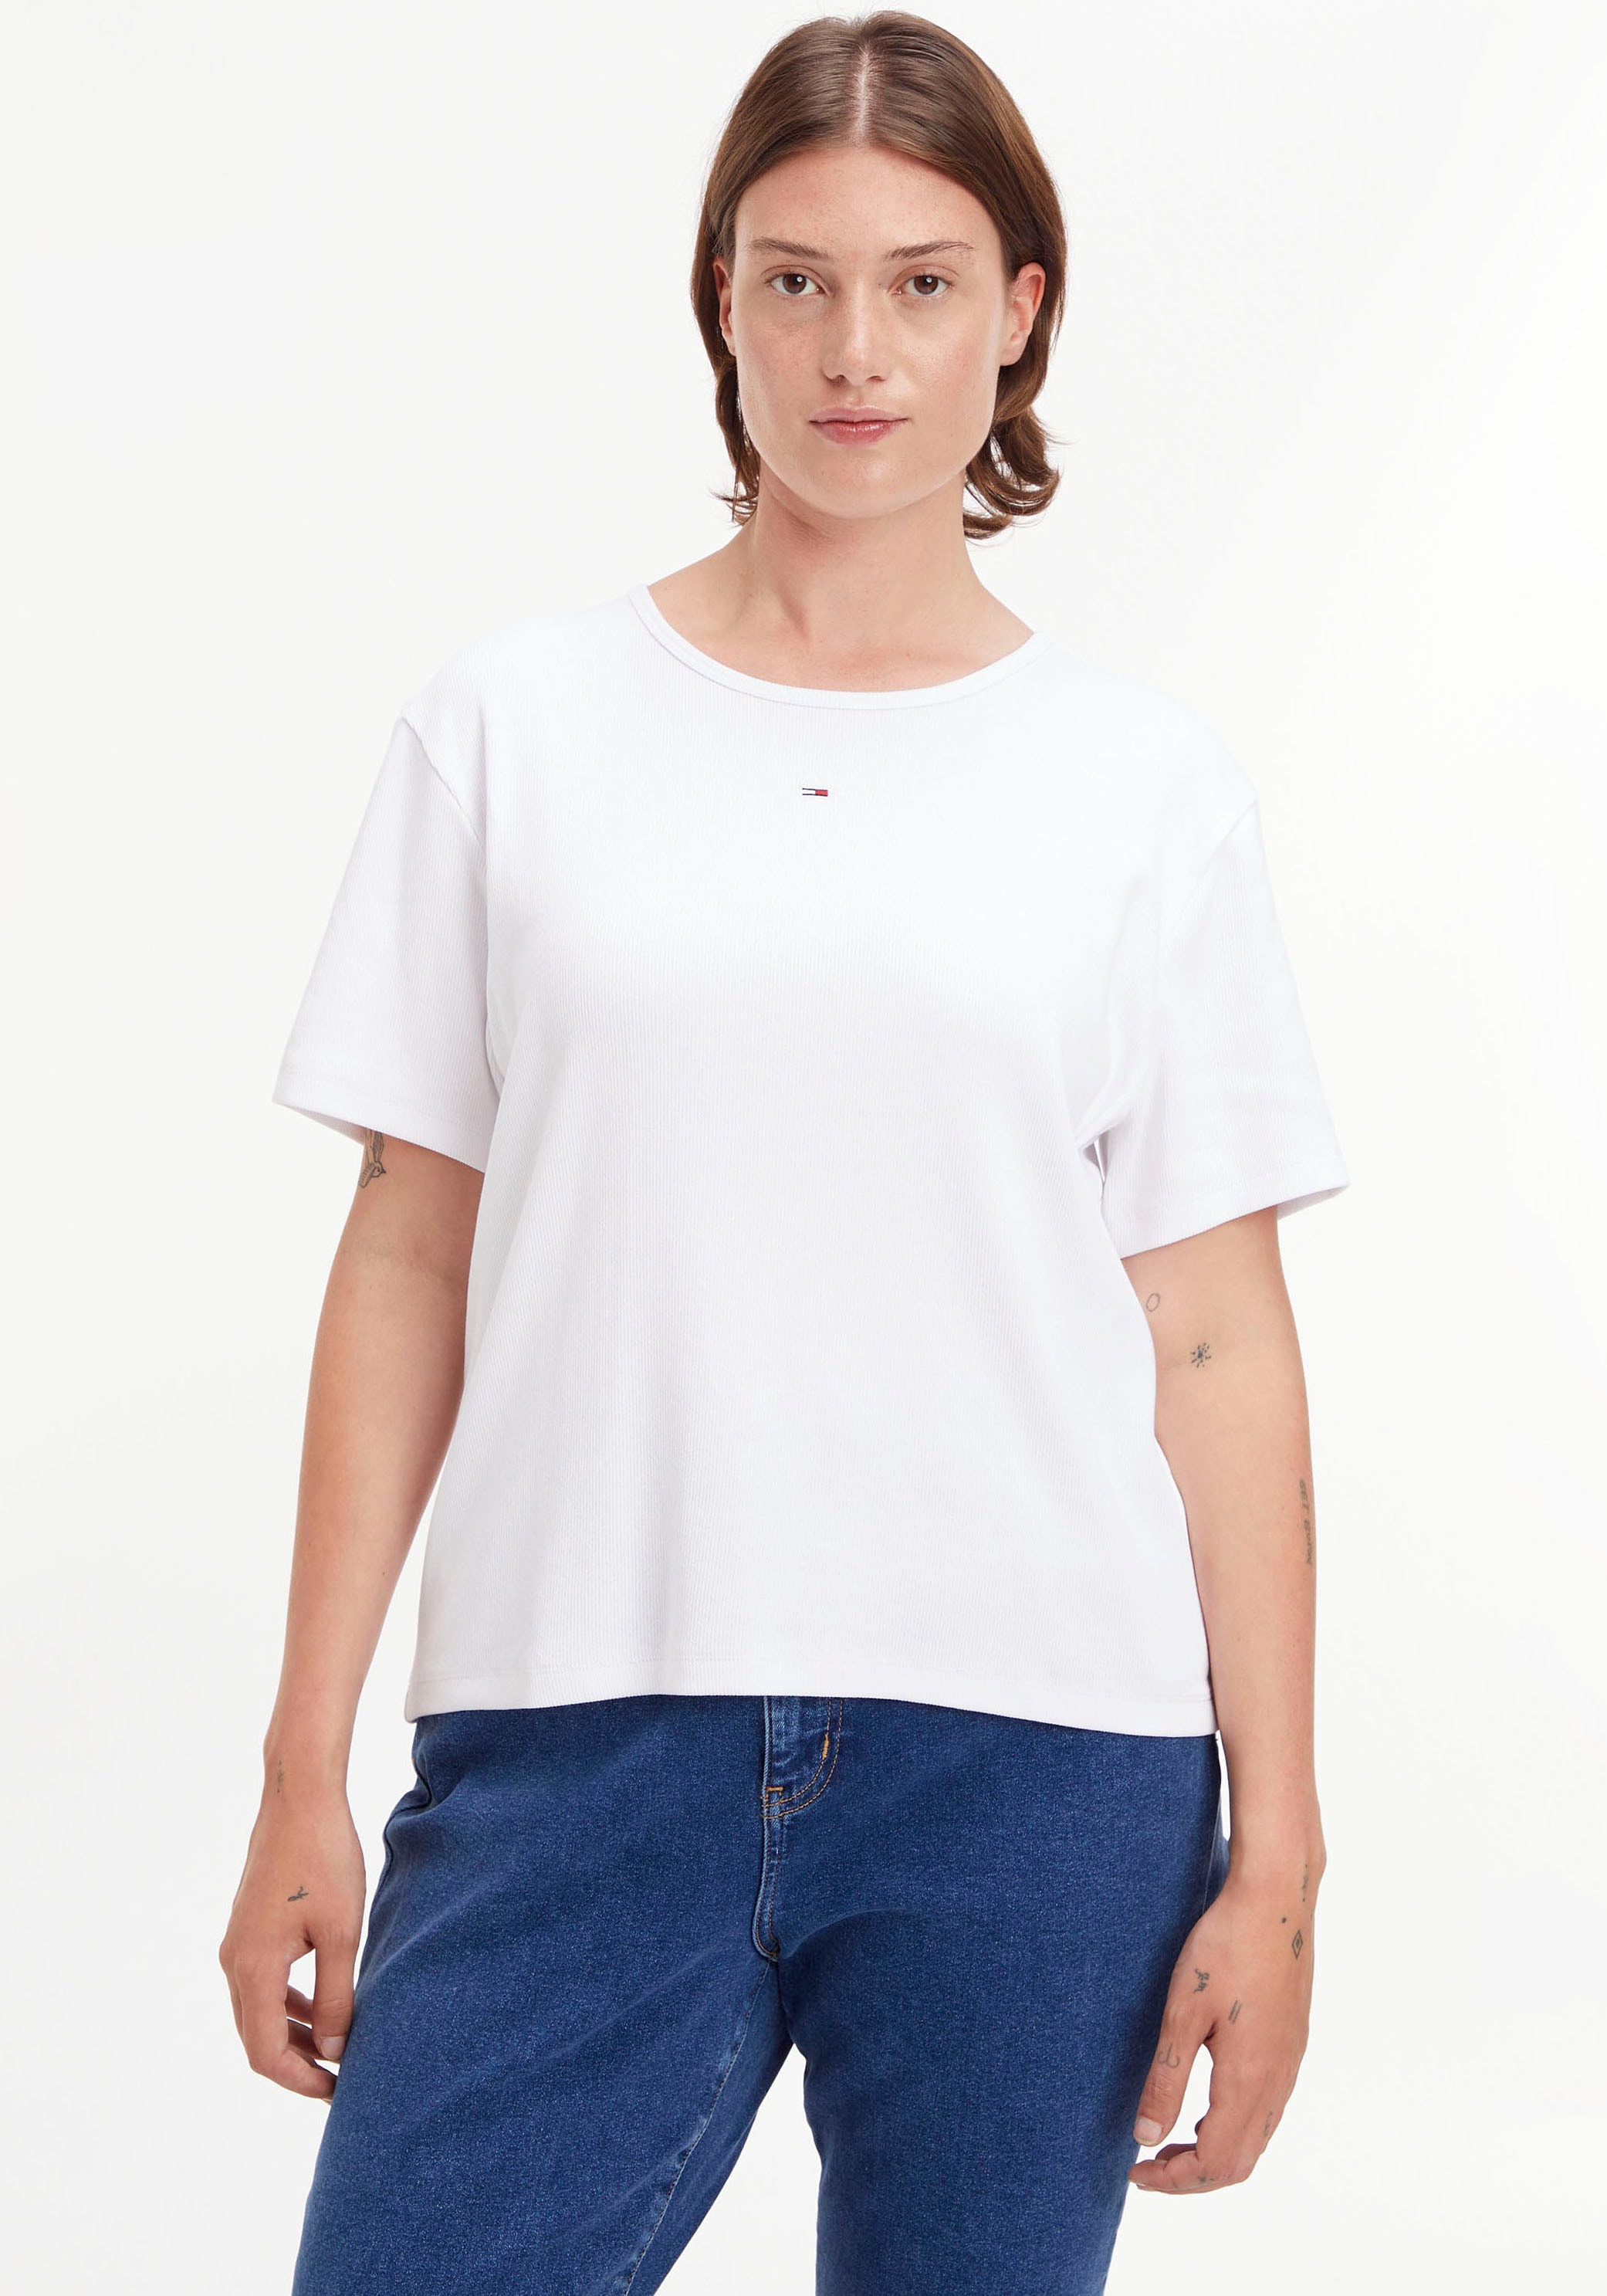 Tommy Jeans Curve Rundhalsshirt »TJW BBY ESSENTIAL CURVE,mit CRV ♕ bei SIZE SS«, Jeans-Logostickerei RIB PLUS Tommy tlg.), (1